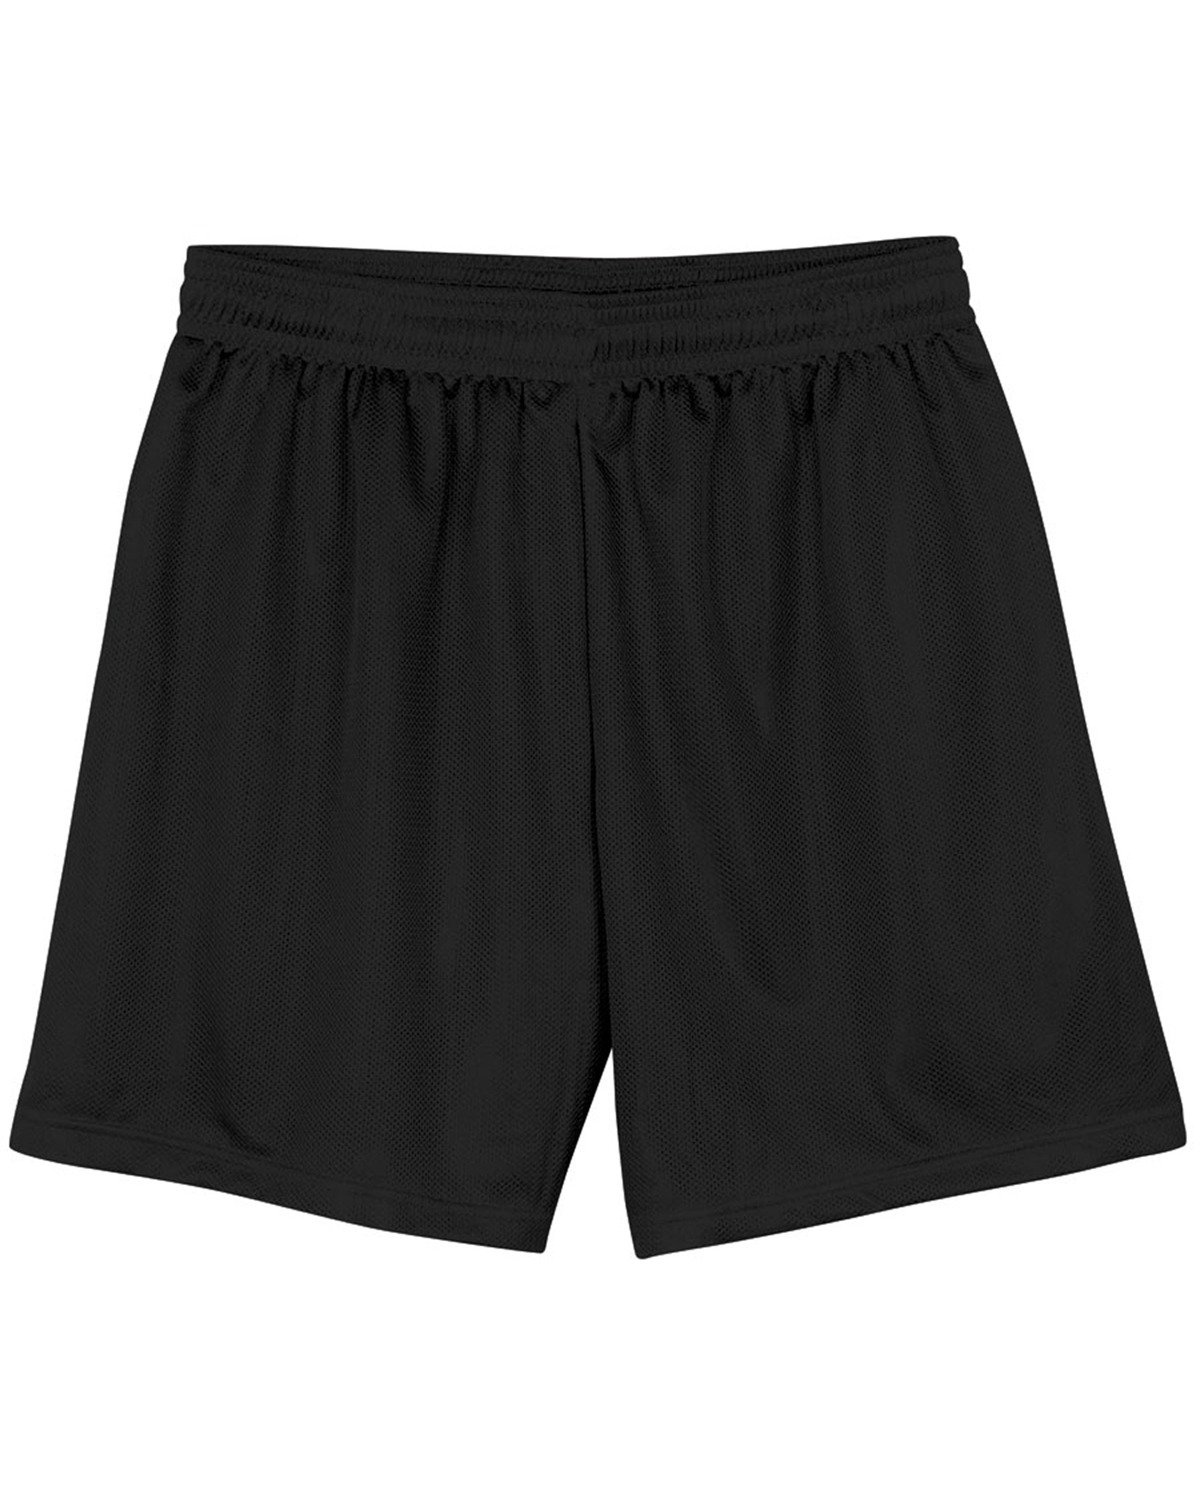 A4 Drop Ship Youth Six Inch Inseam Lined Micromesh Short